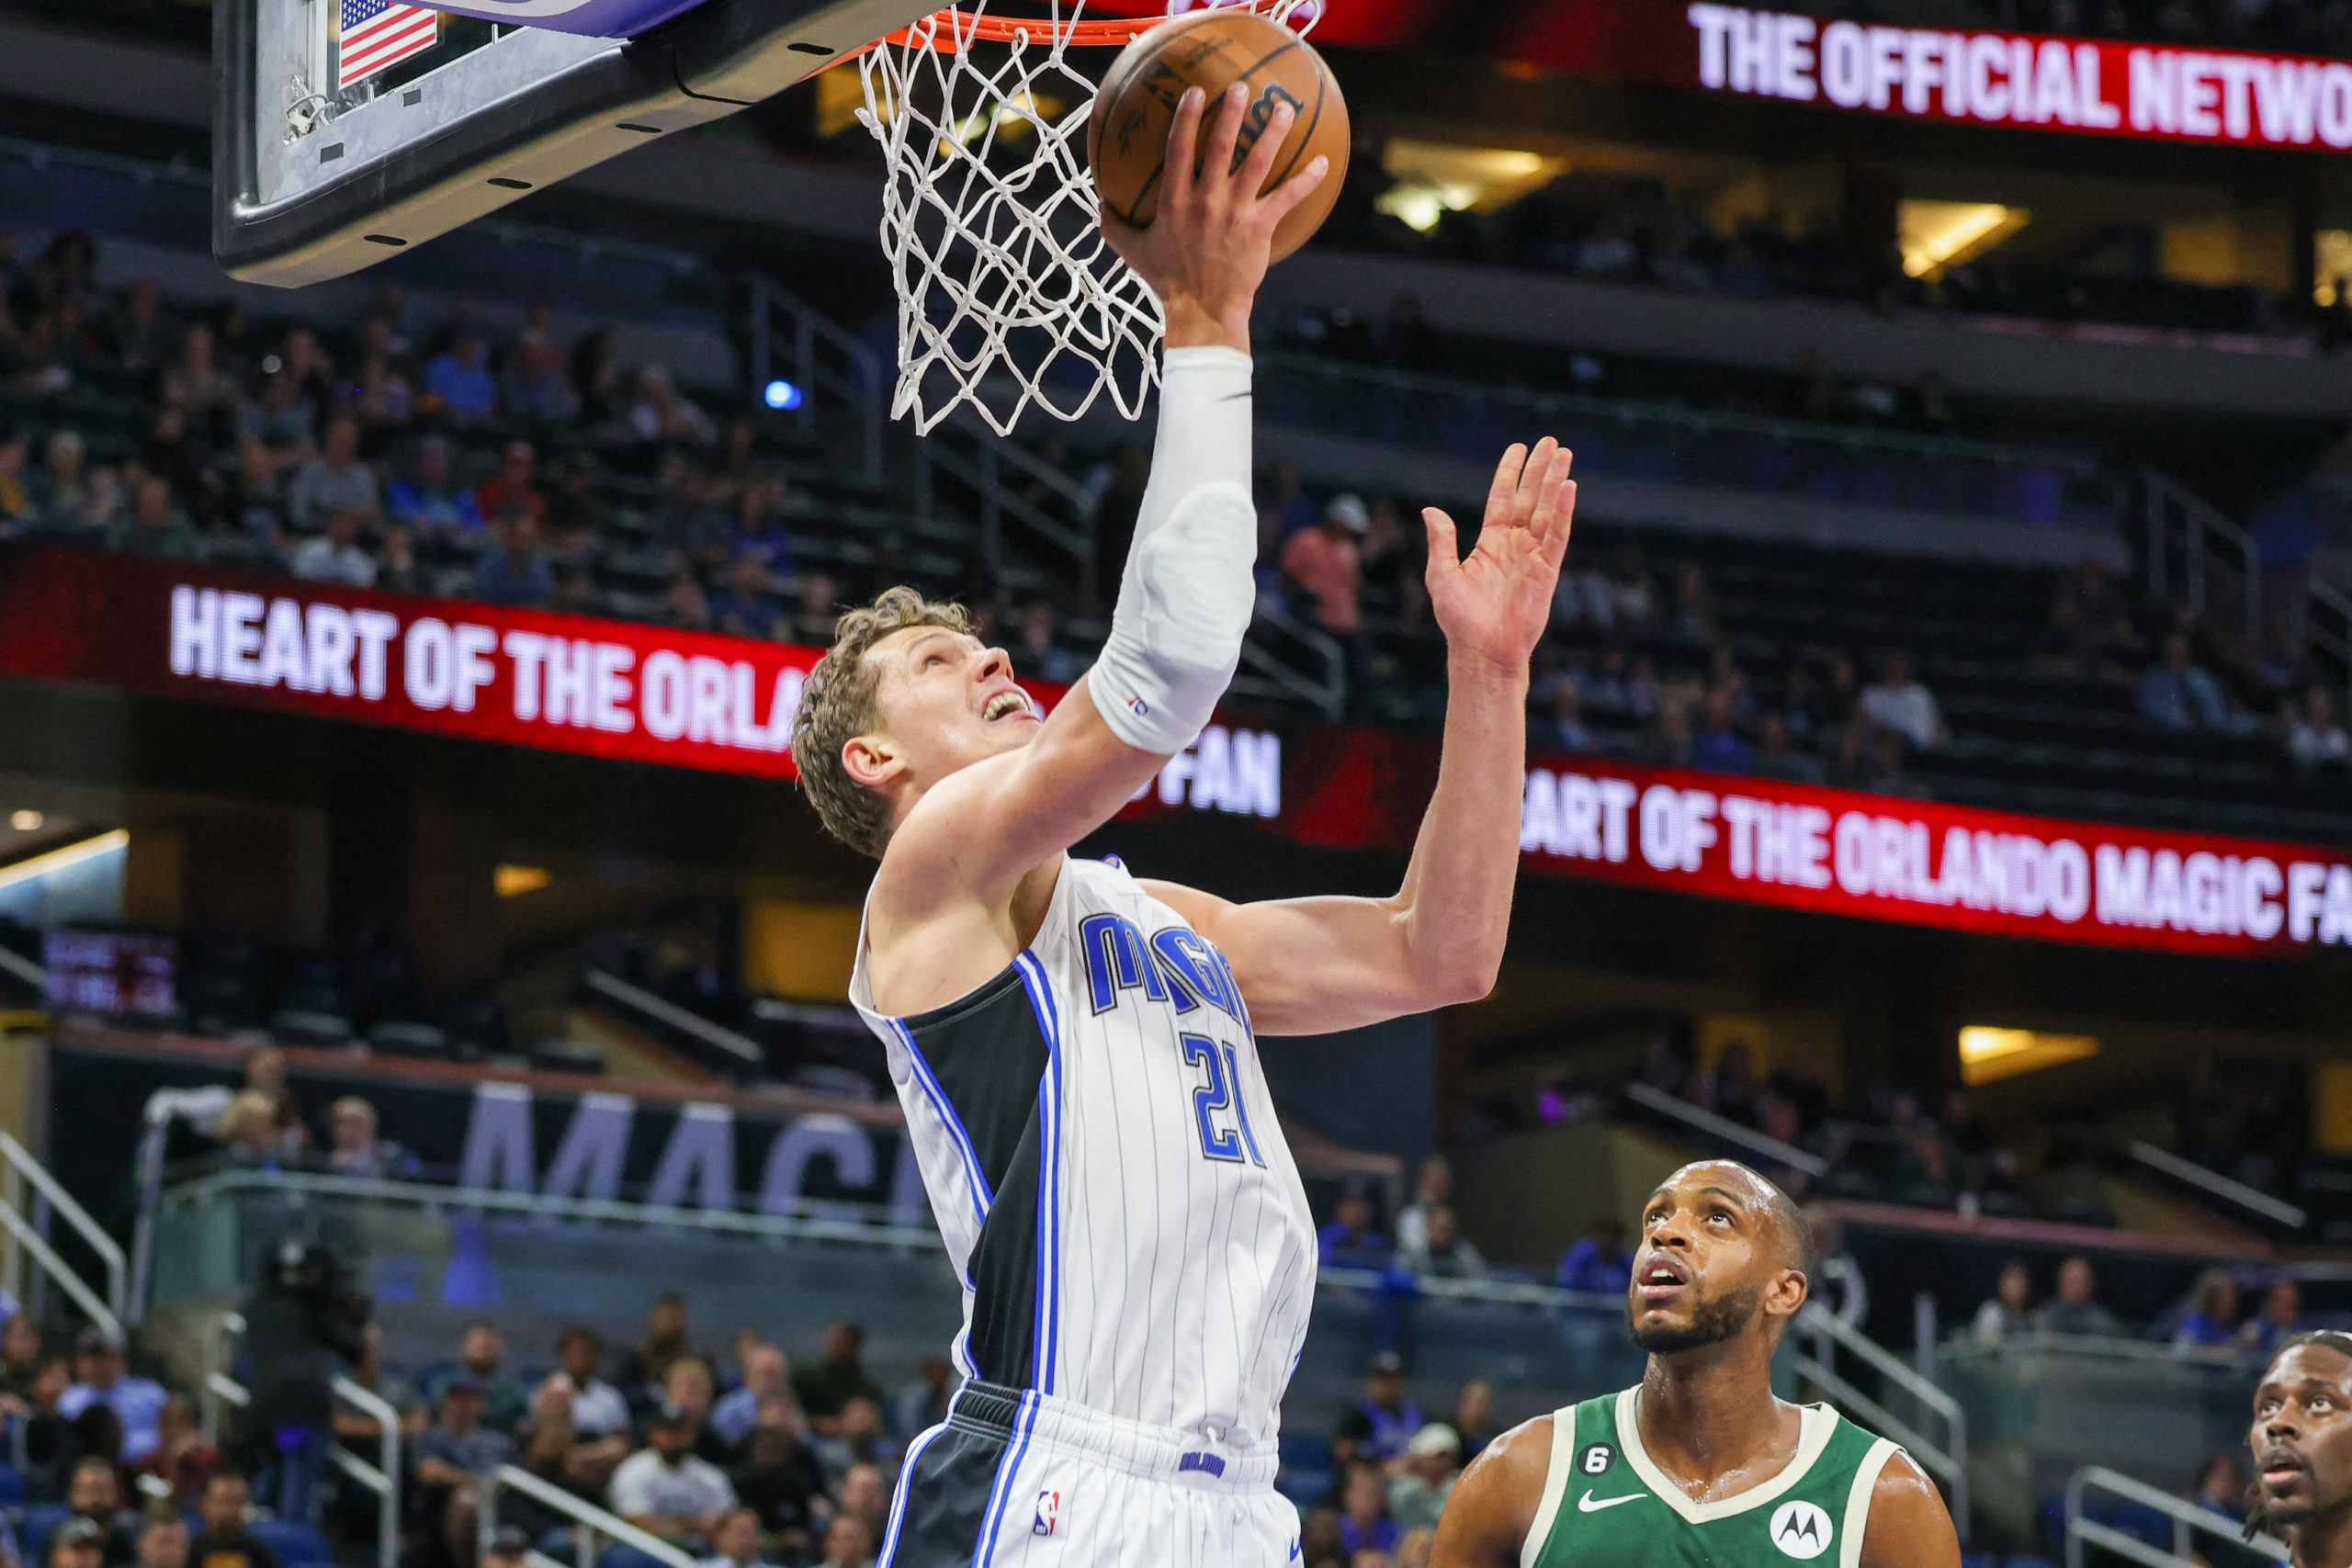 Orlando Magic center Moritz Wagner (21) goes to the basket during the first quarter against the Milwaukee Bucks at Amway Center.